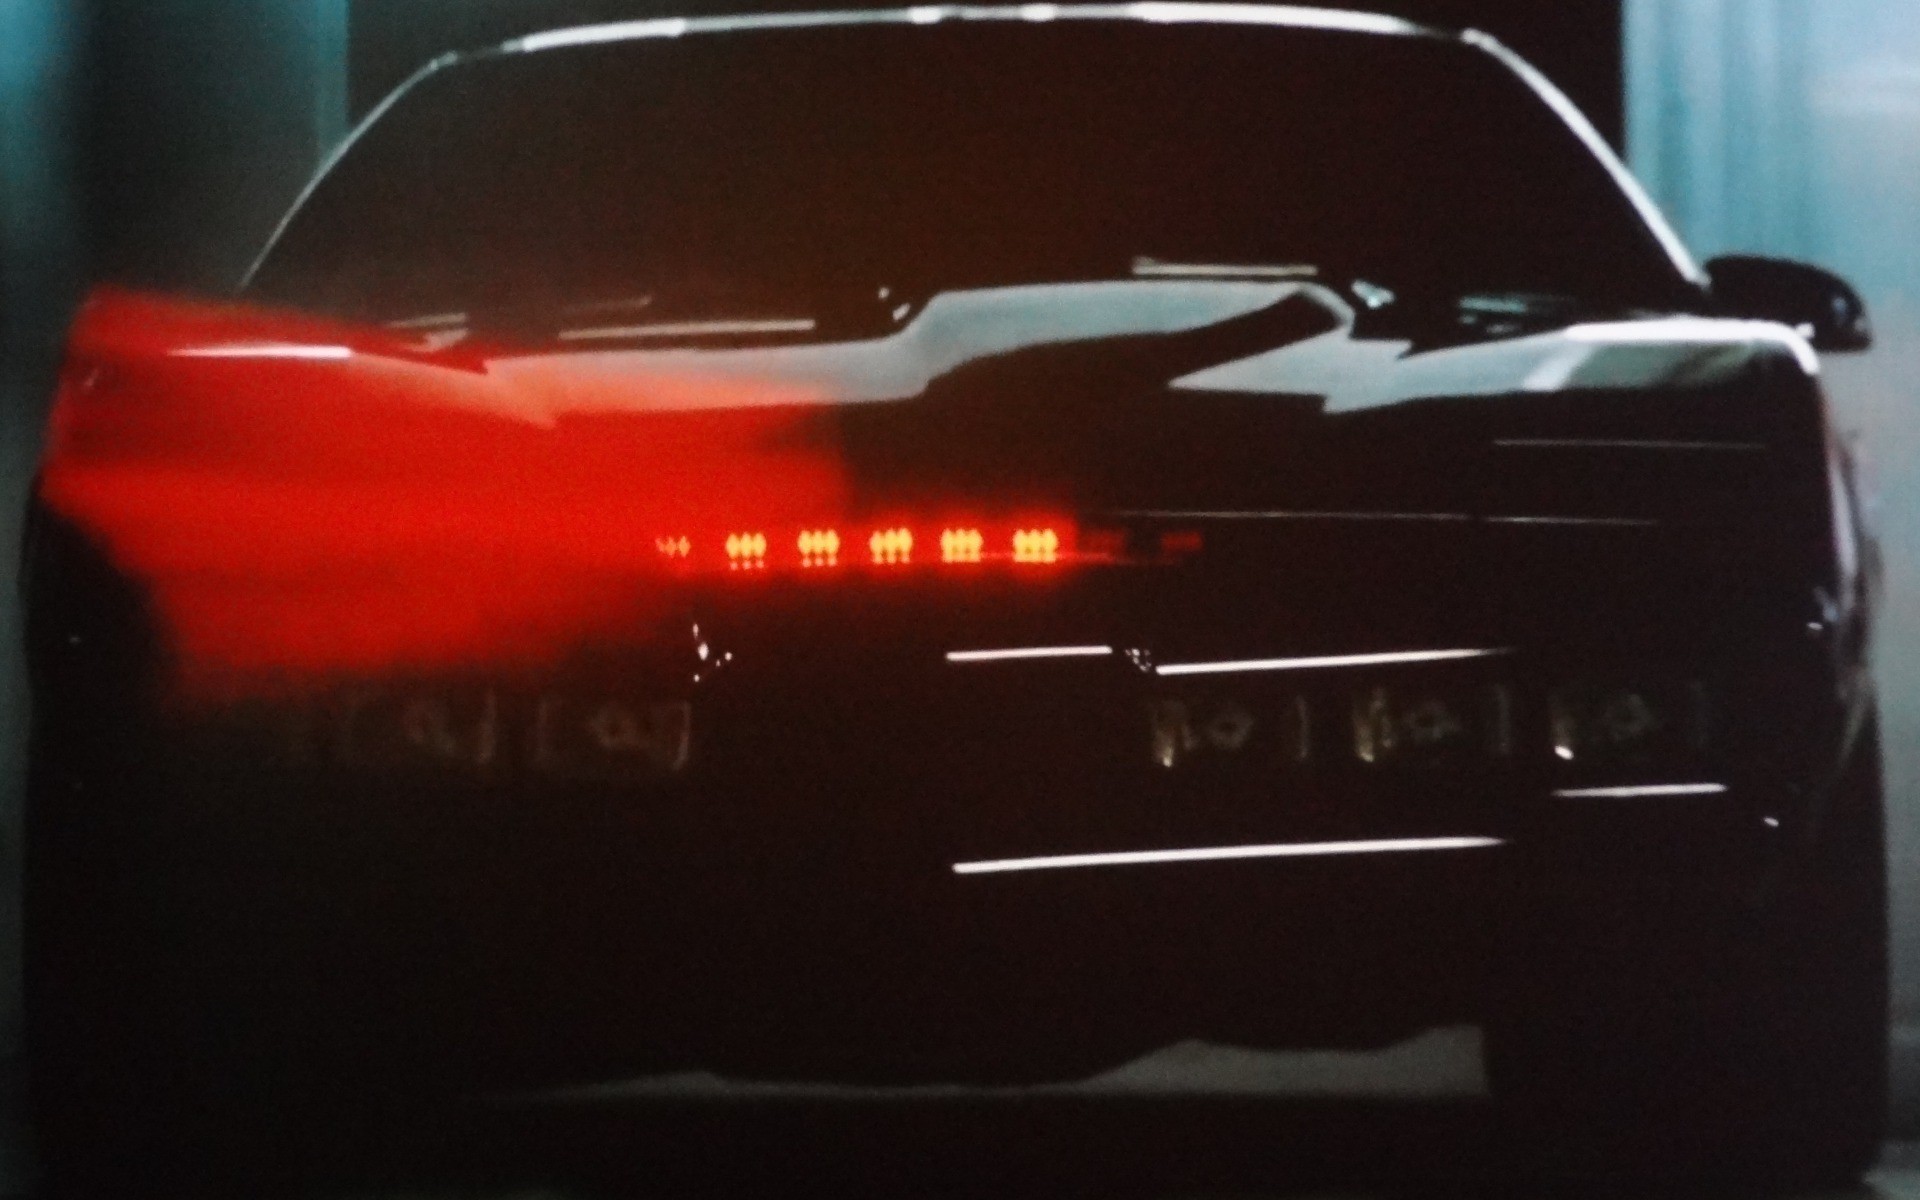 1920x1200 like knight rider live wallpaper knight rider wallpaper for android